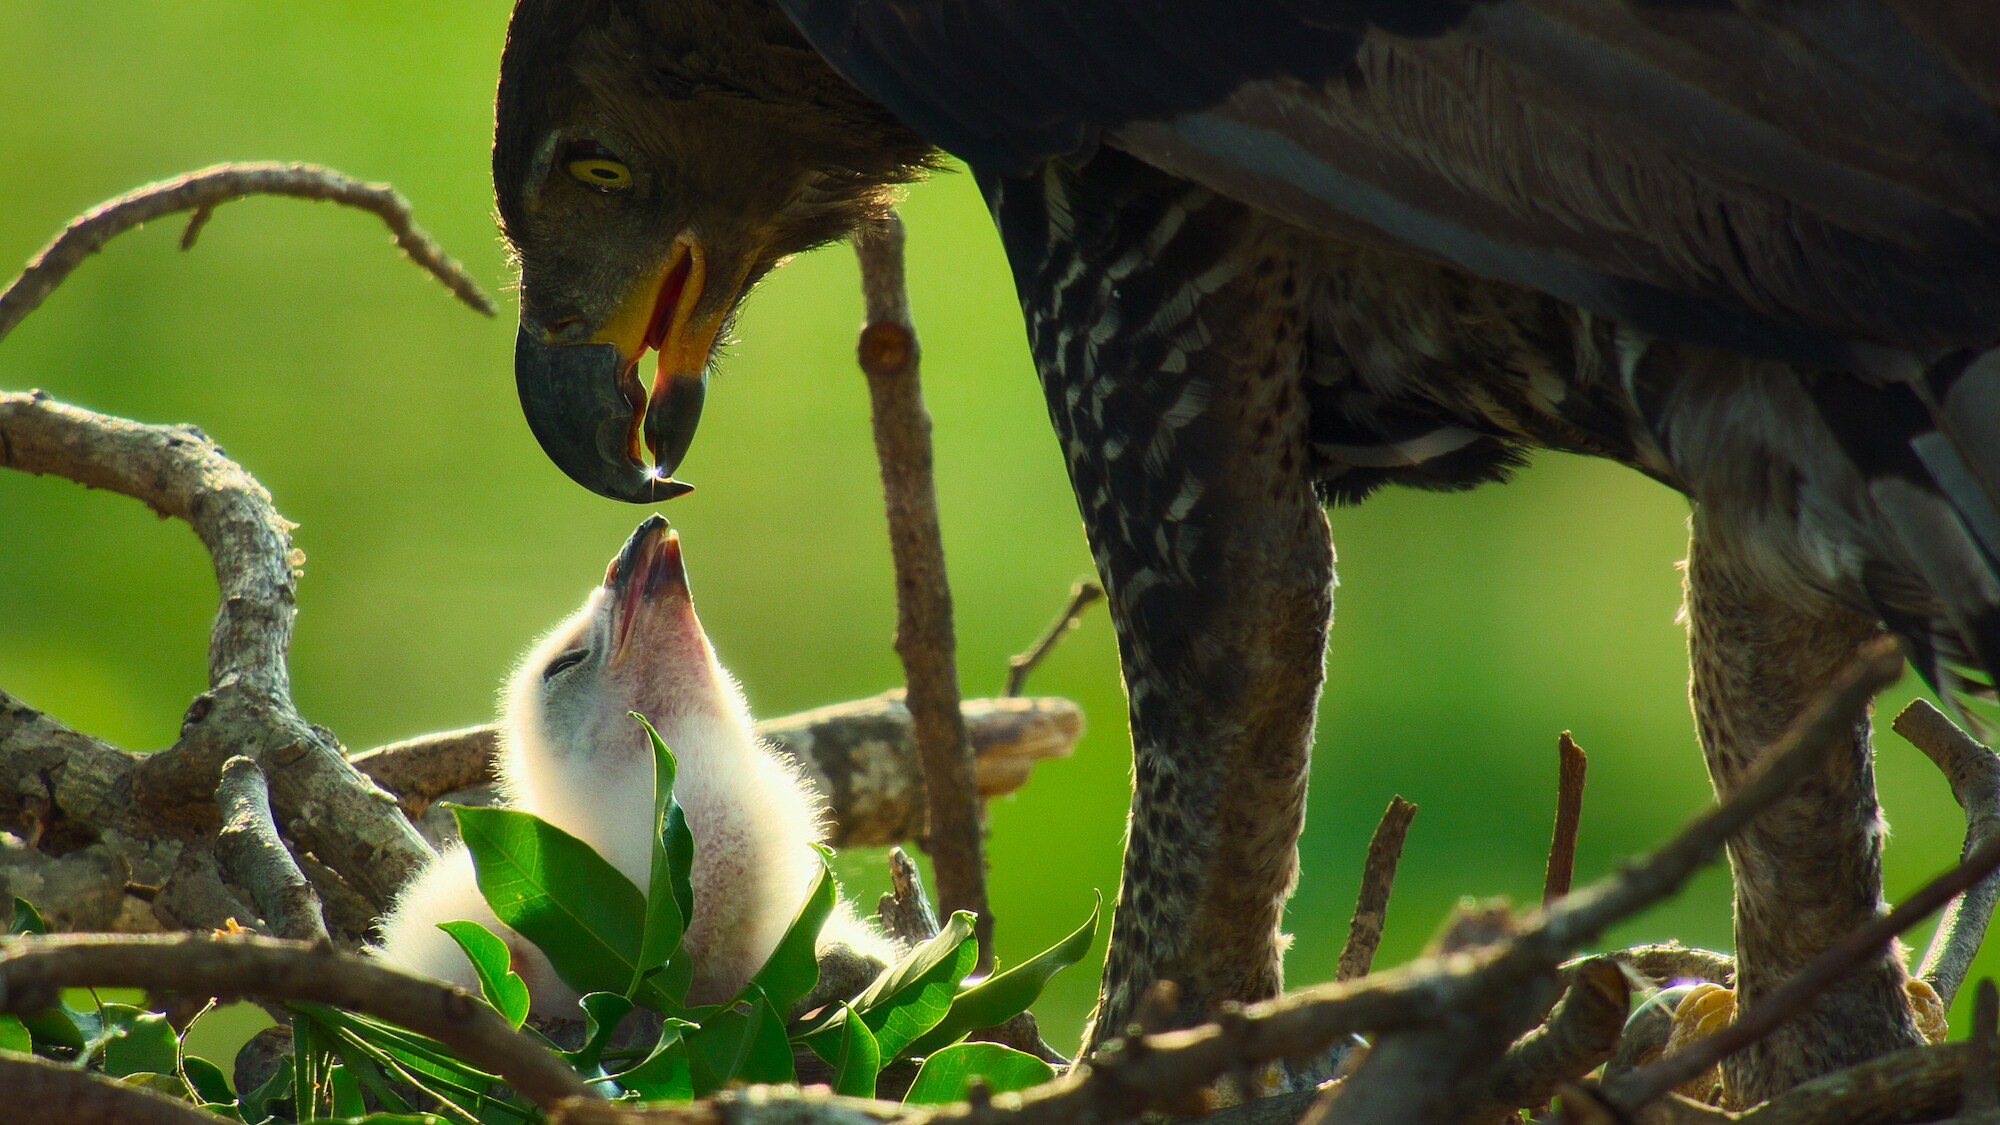 Crowned Eagle feeding it's chick. (Credit: National Geographic/Bertie Gregory for Disney+)